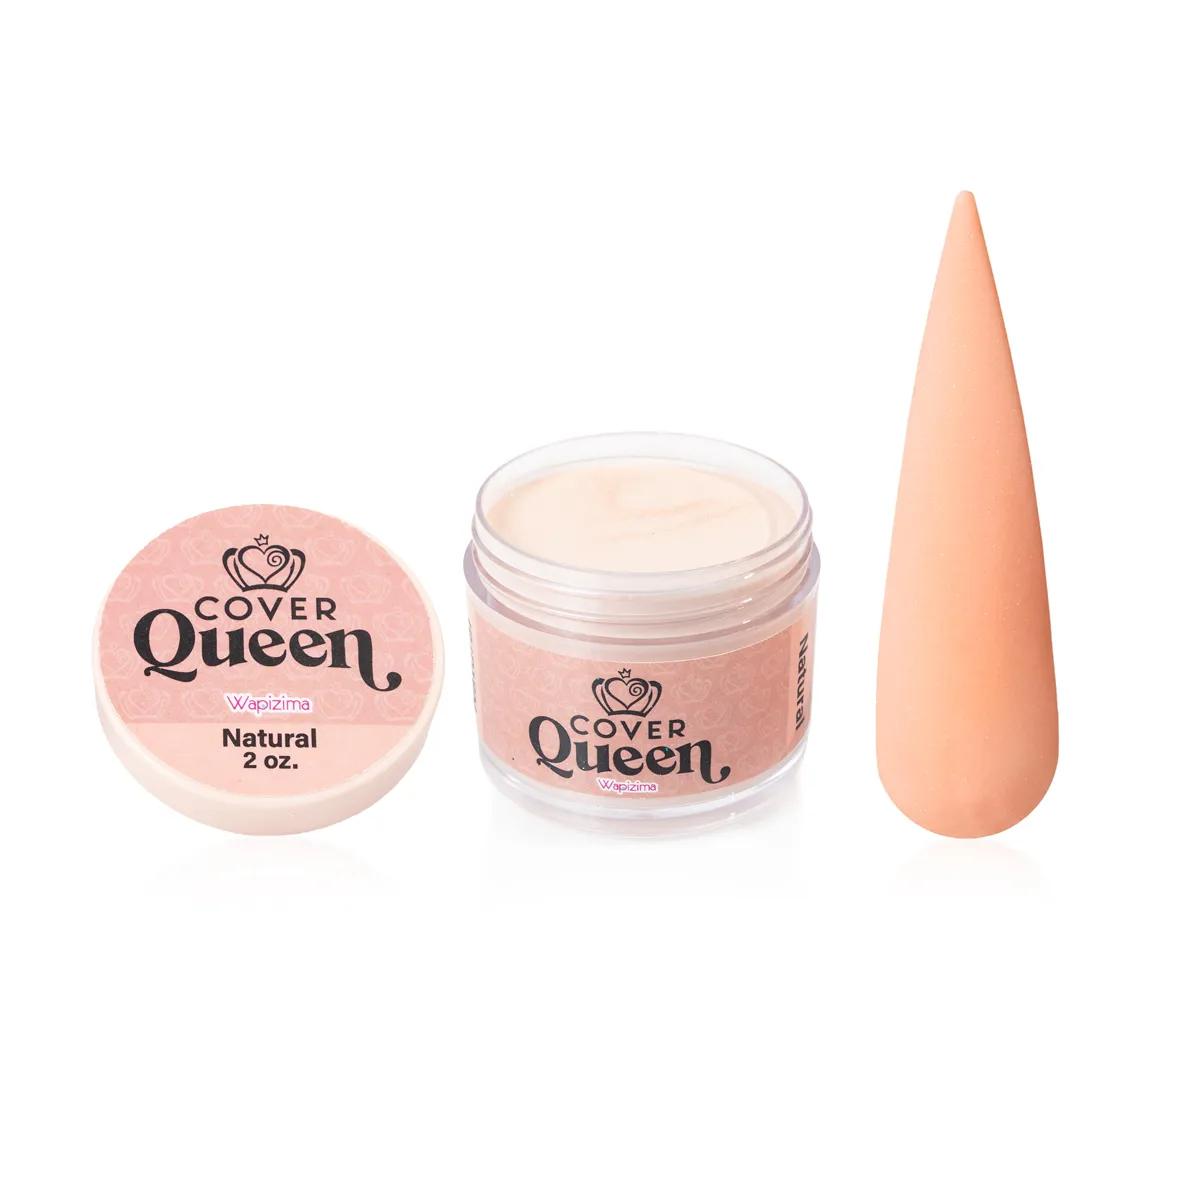 W.Cover Queen Natural 2 oz